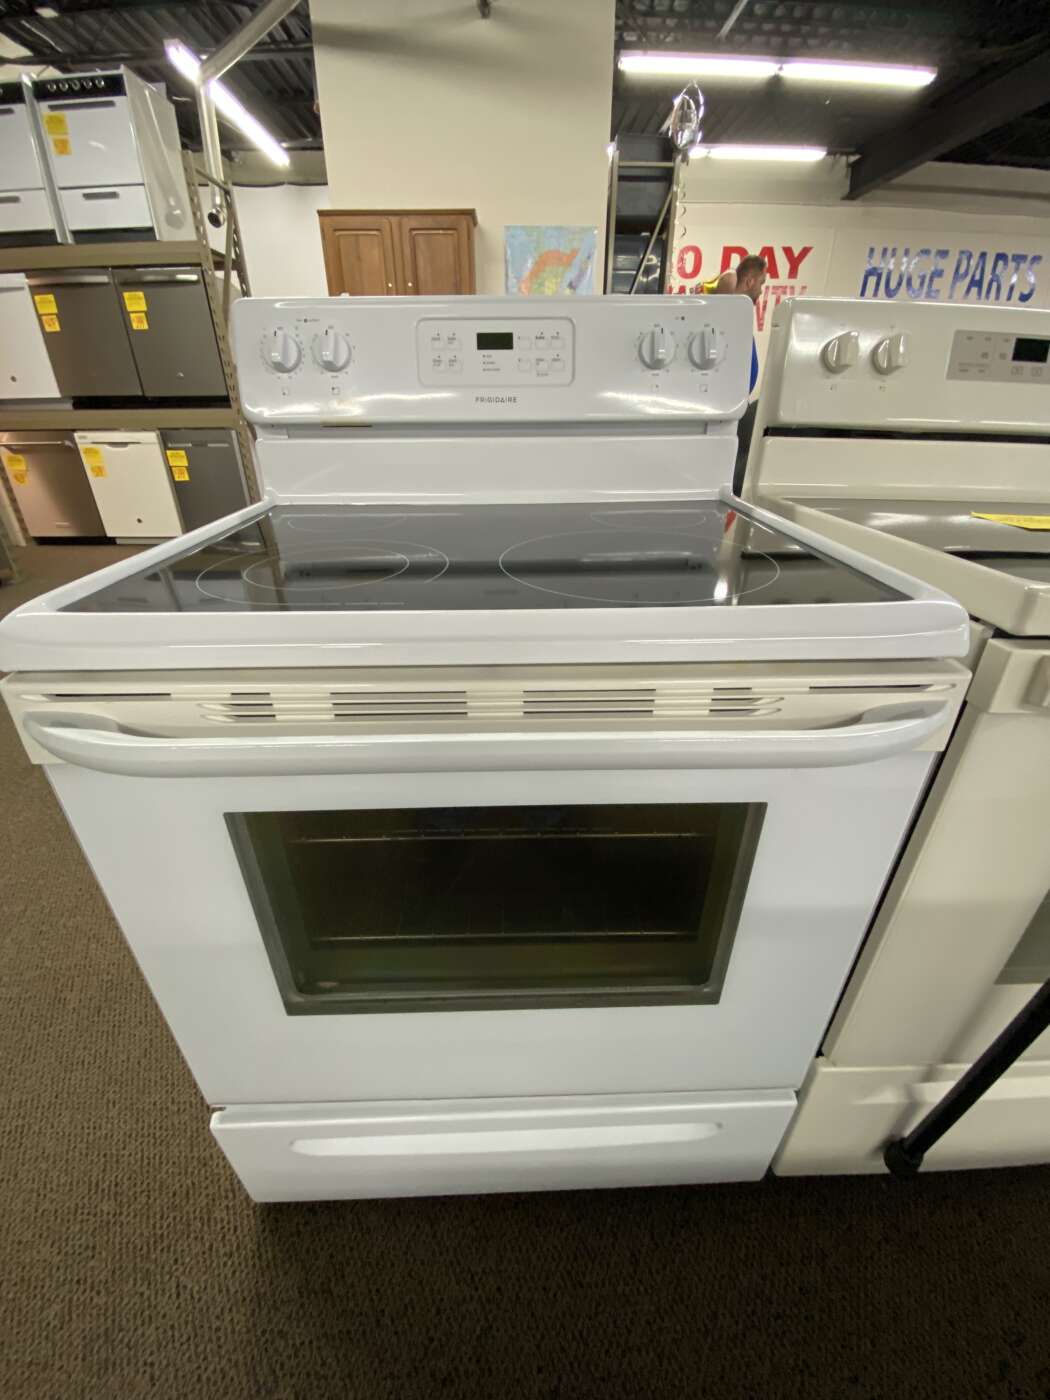 Reconditioned FRIGIDAIRE Self-Clean Oven Electric Range – White